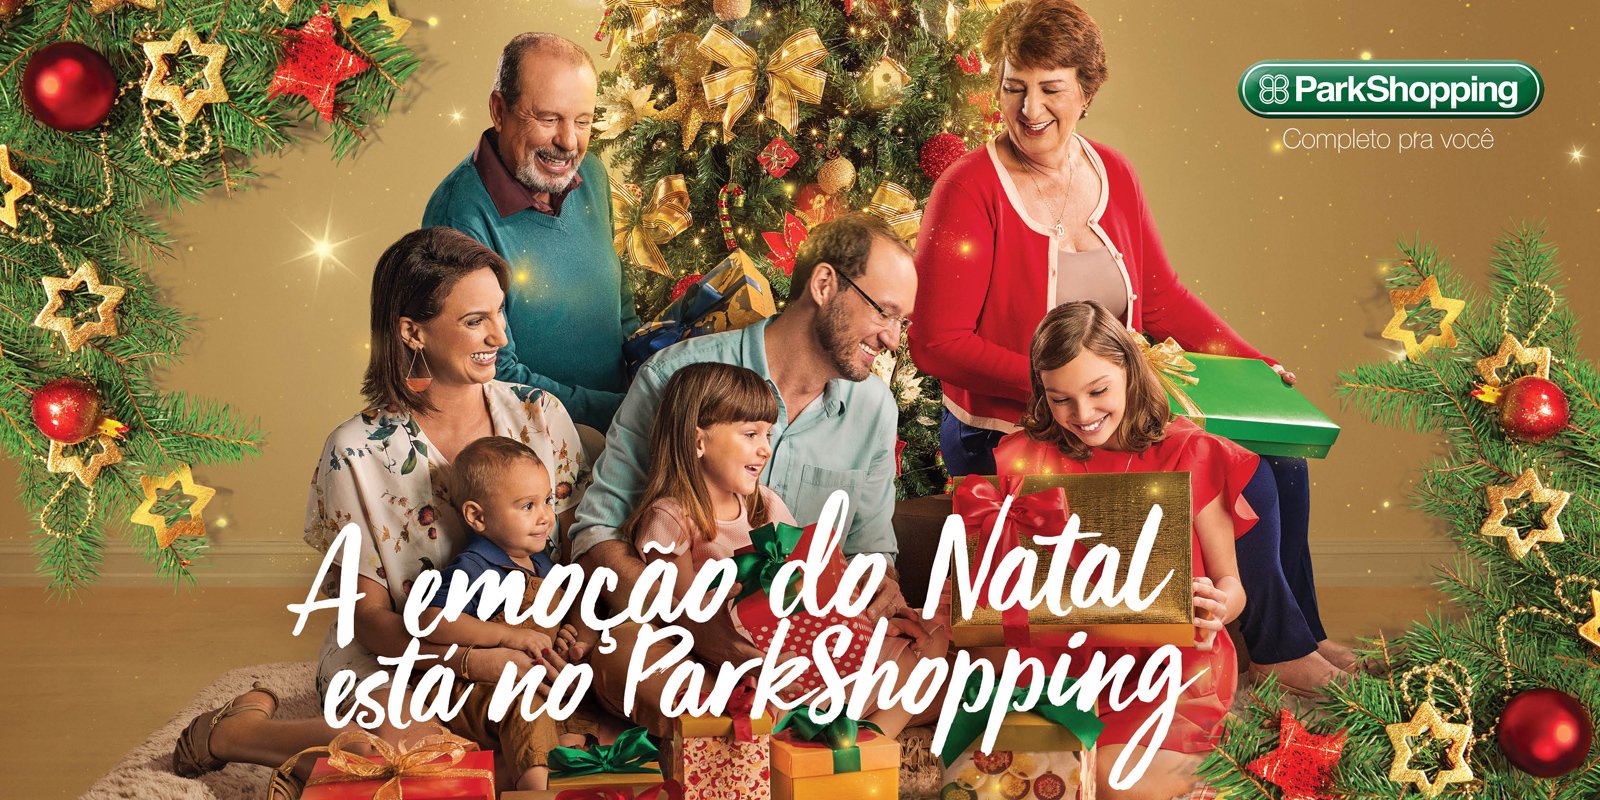 Featured image for “Natal no Parkshopping”